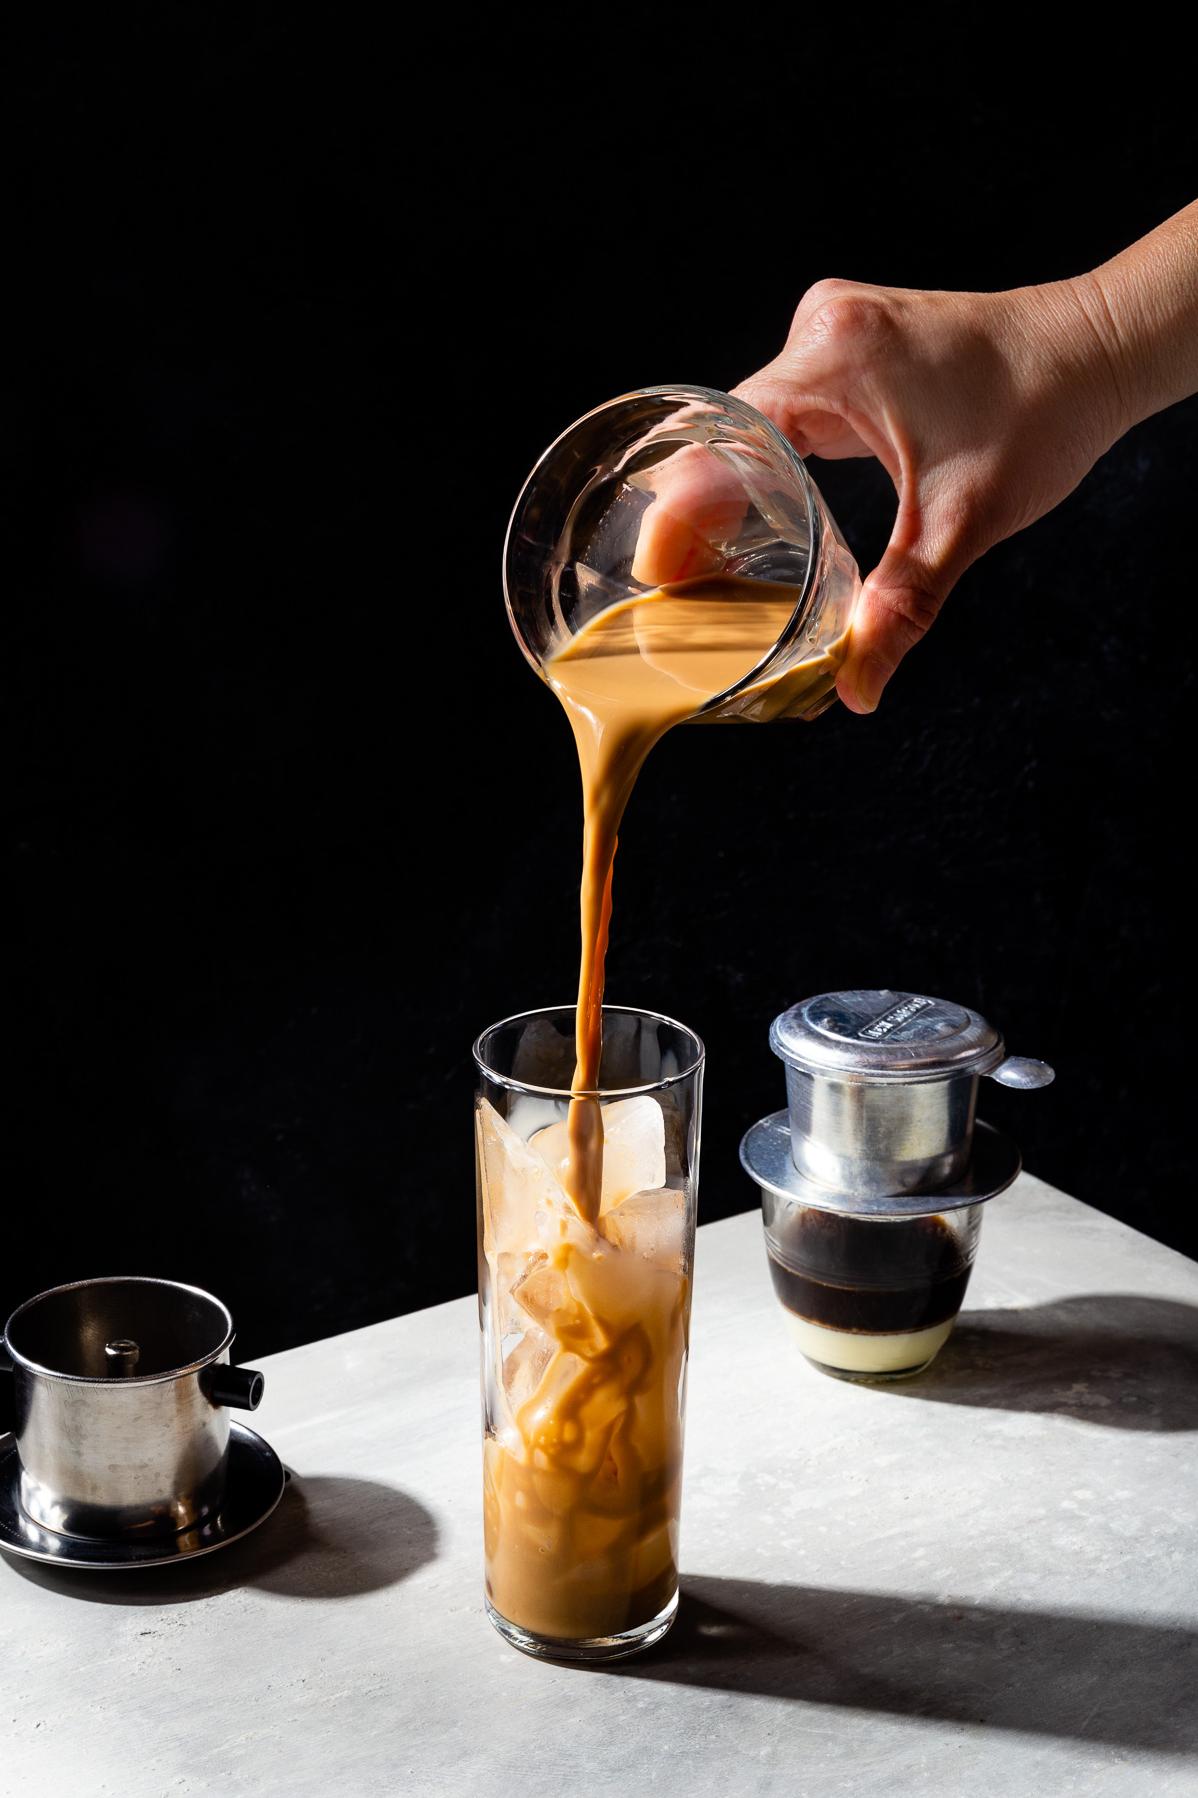  Your taste buds will be transported to the streets of Vietnam with just one sip of this coffee.